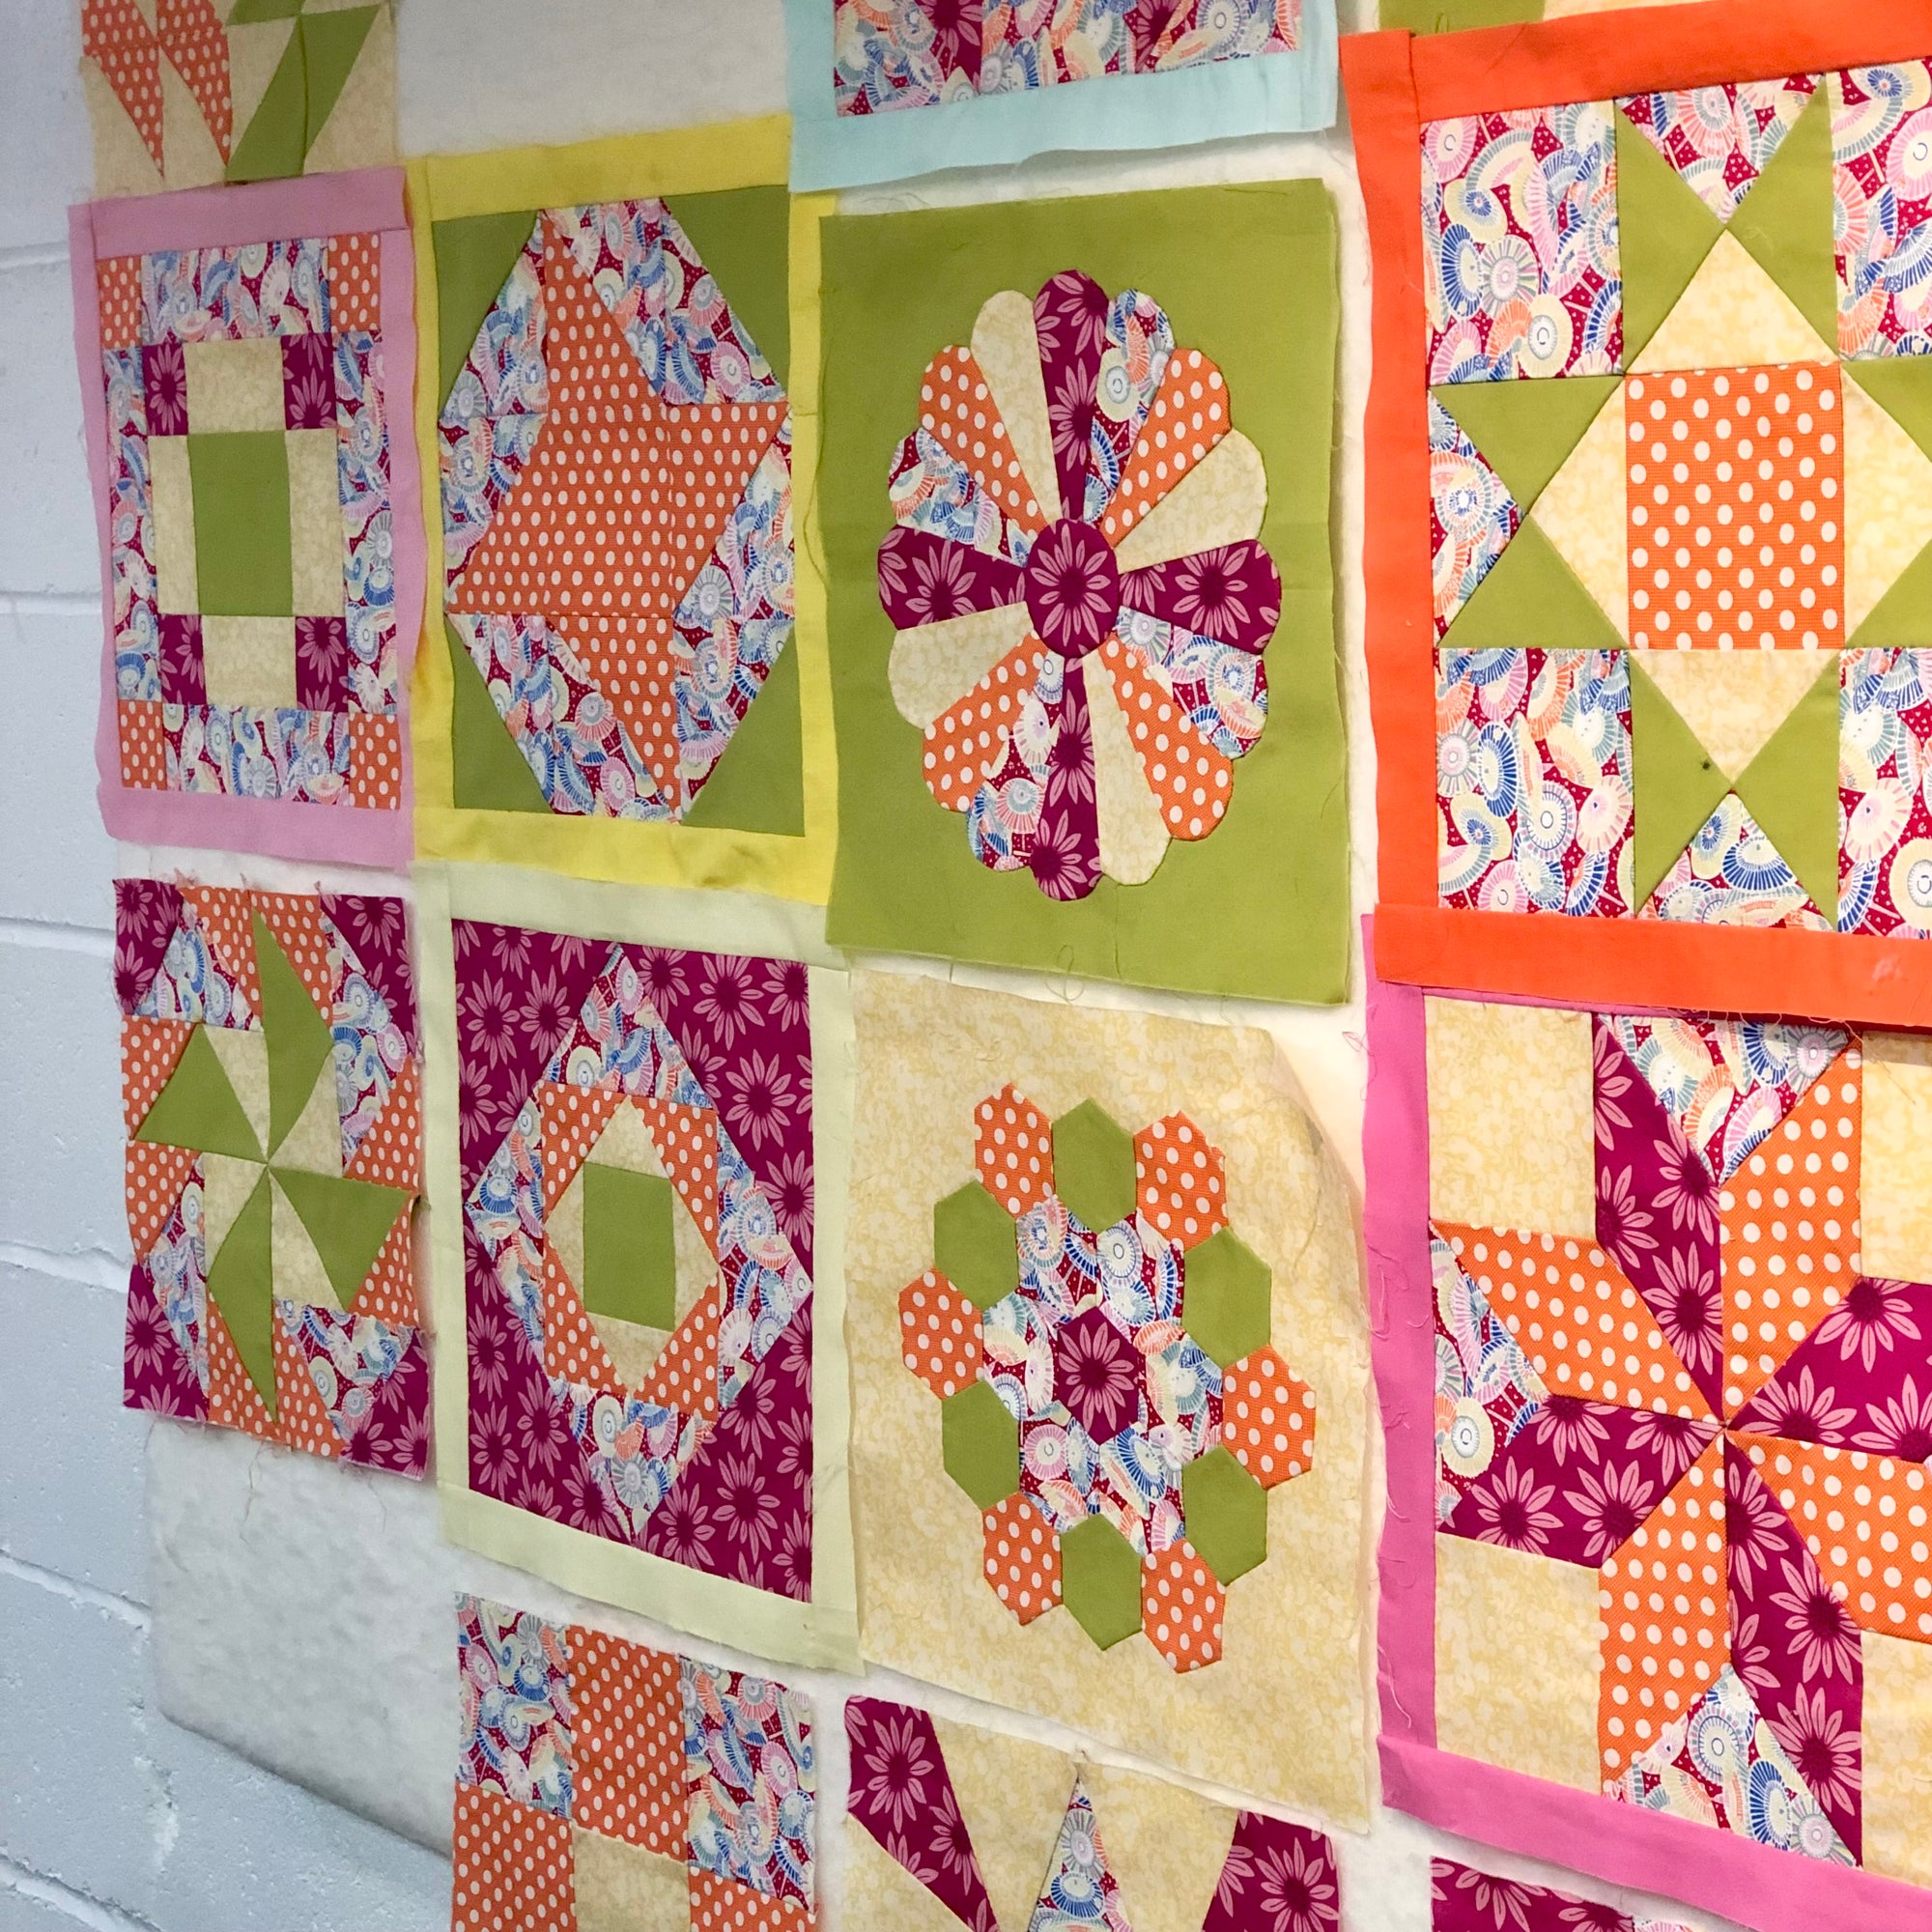 Learn to Make a Quilt by Hand - begins April 27 10am - 12pm